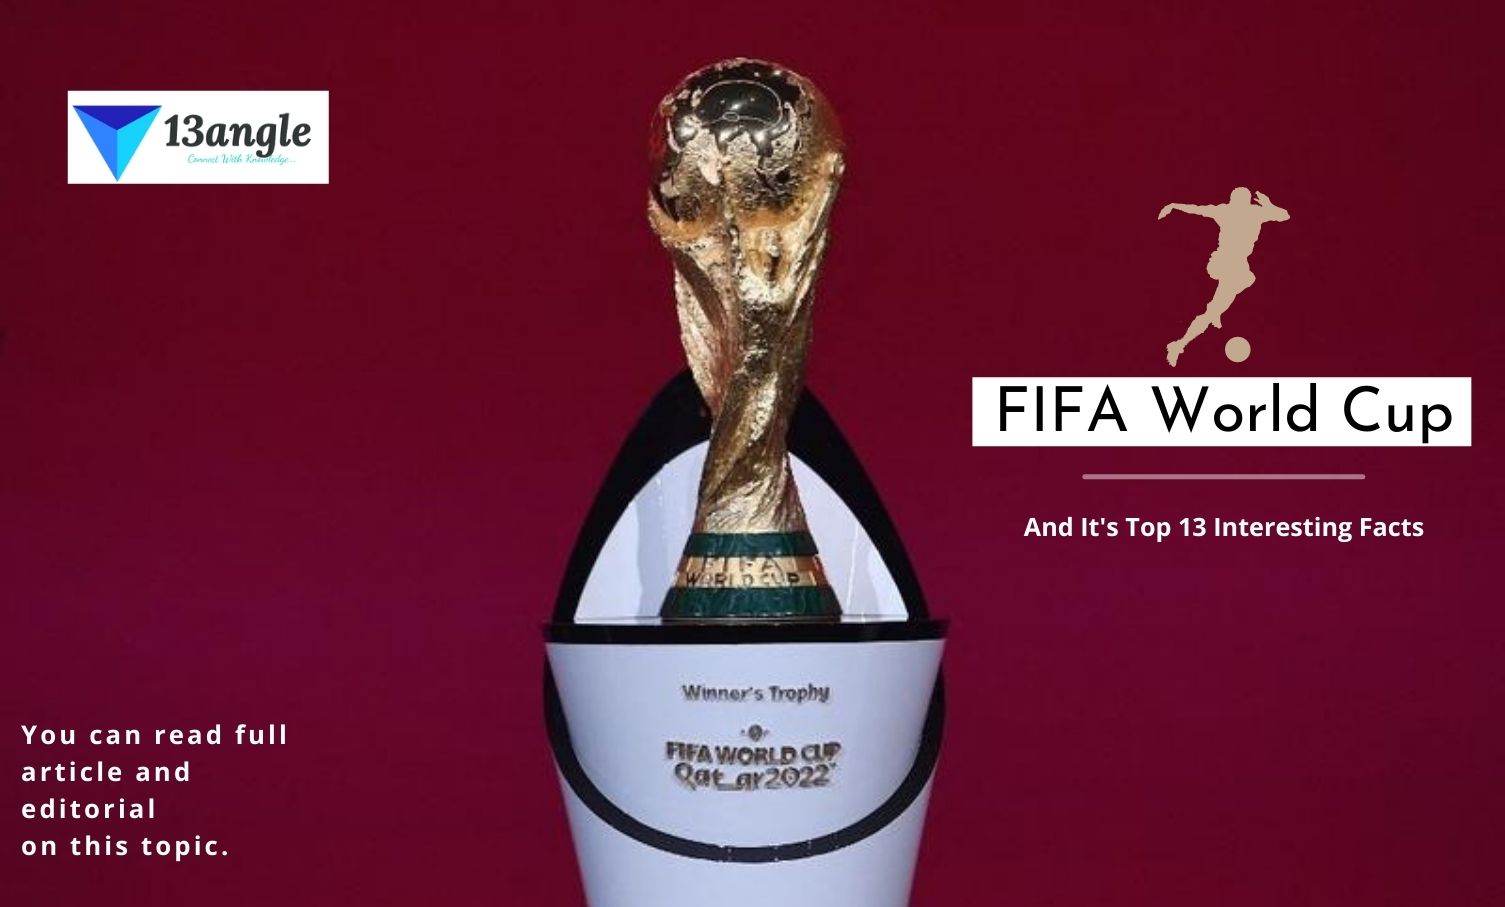 FIFA World Cup And It's Top 13 Interesting Facts- 13angle.com